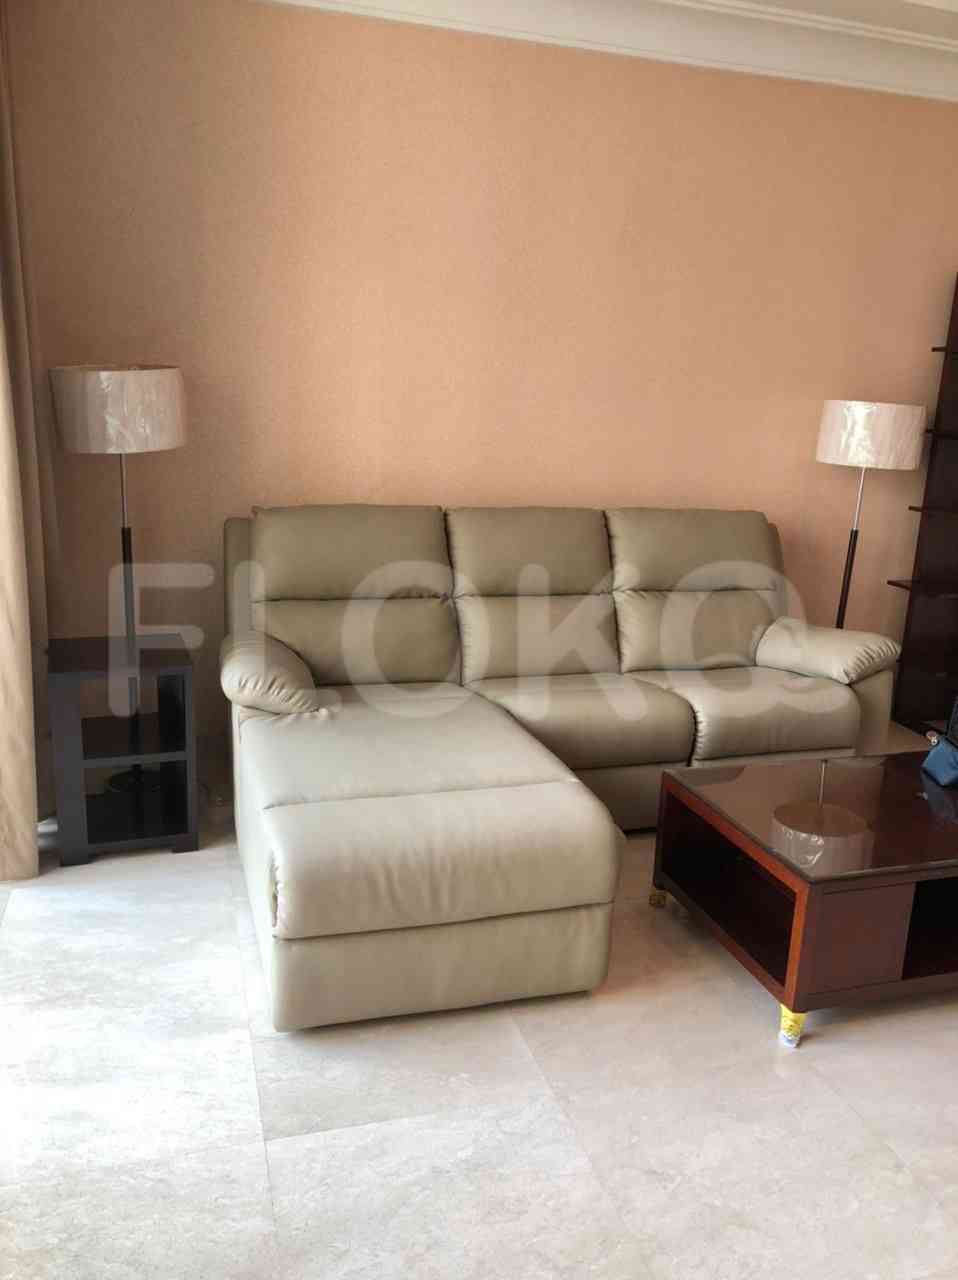 2 Bedroom on 9th Floor for Rent in Pakubuwono View - fga42e 6